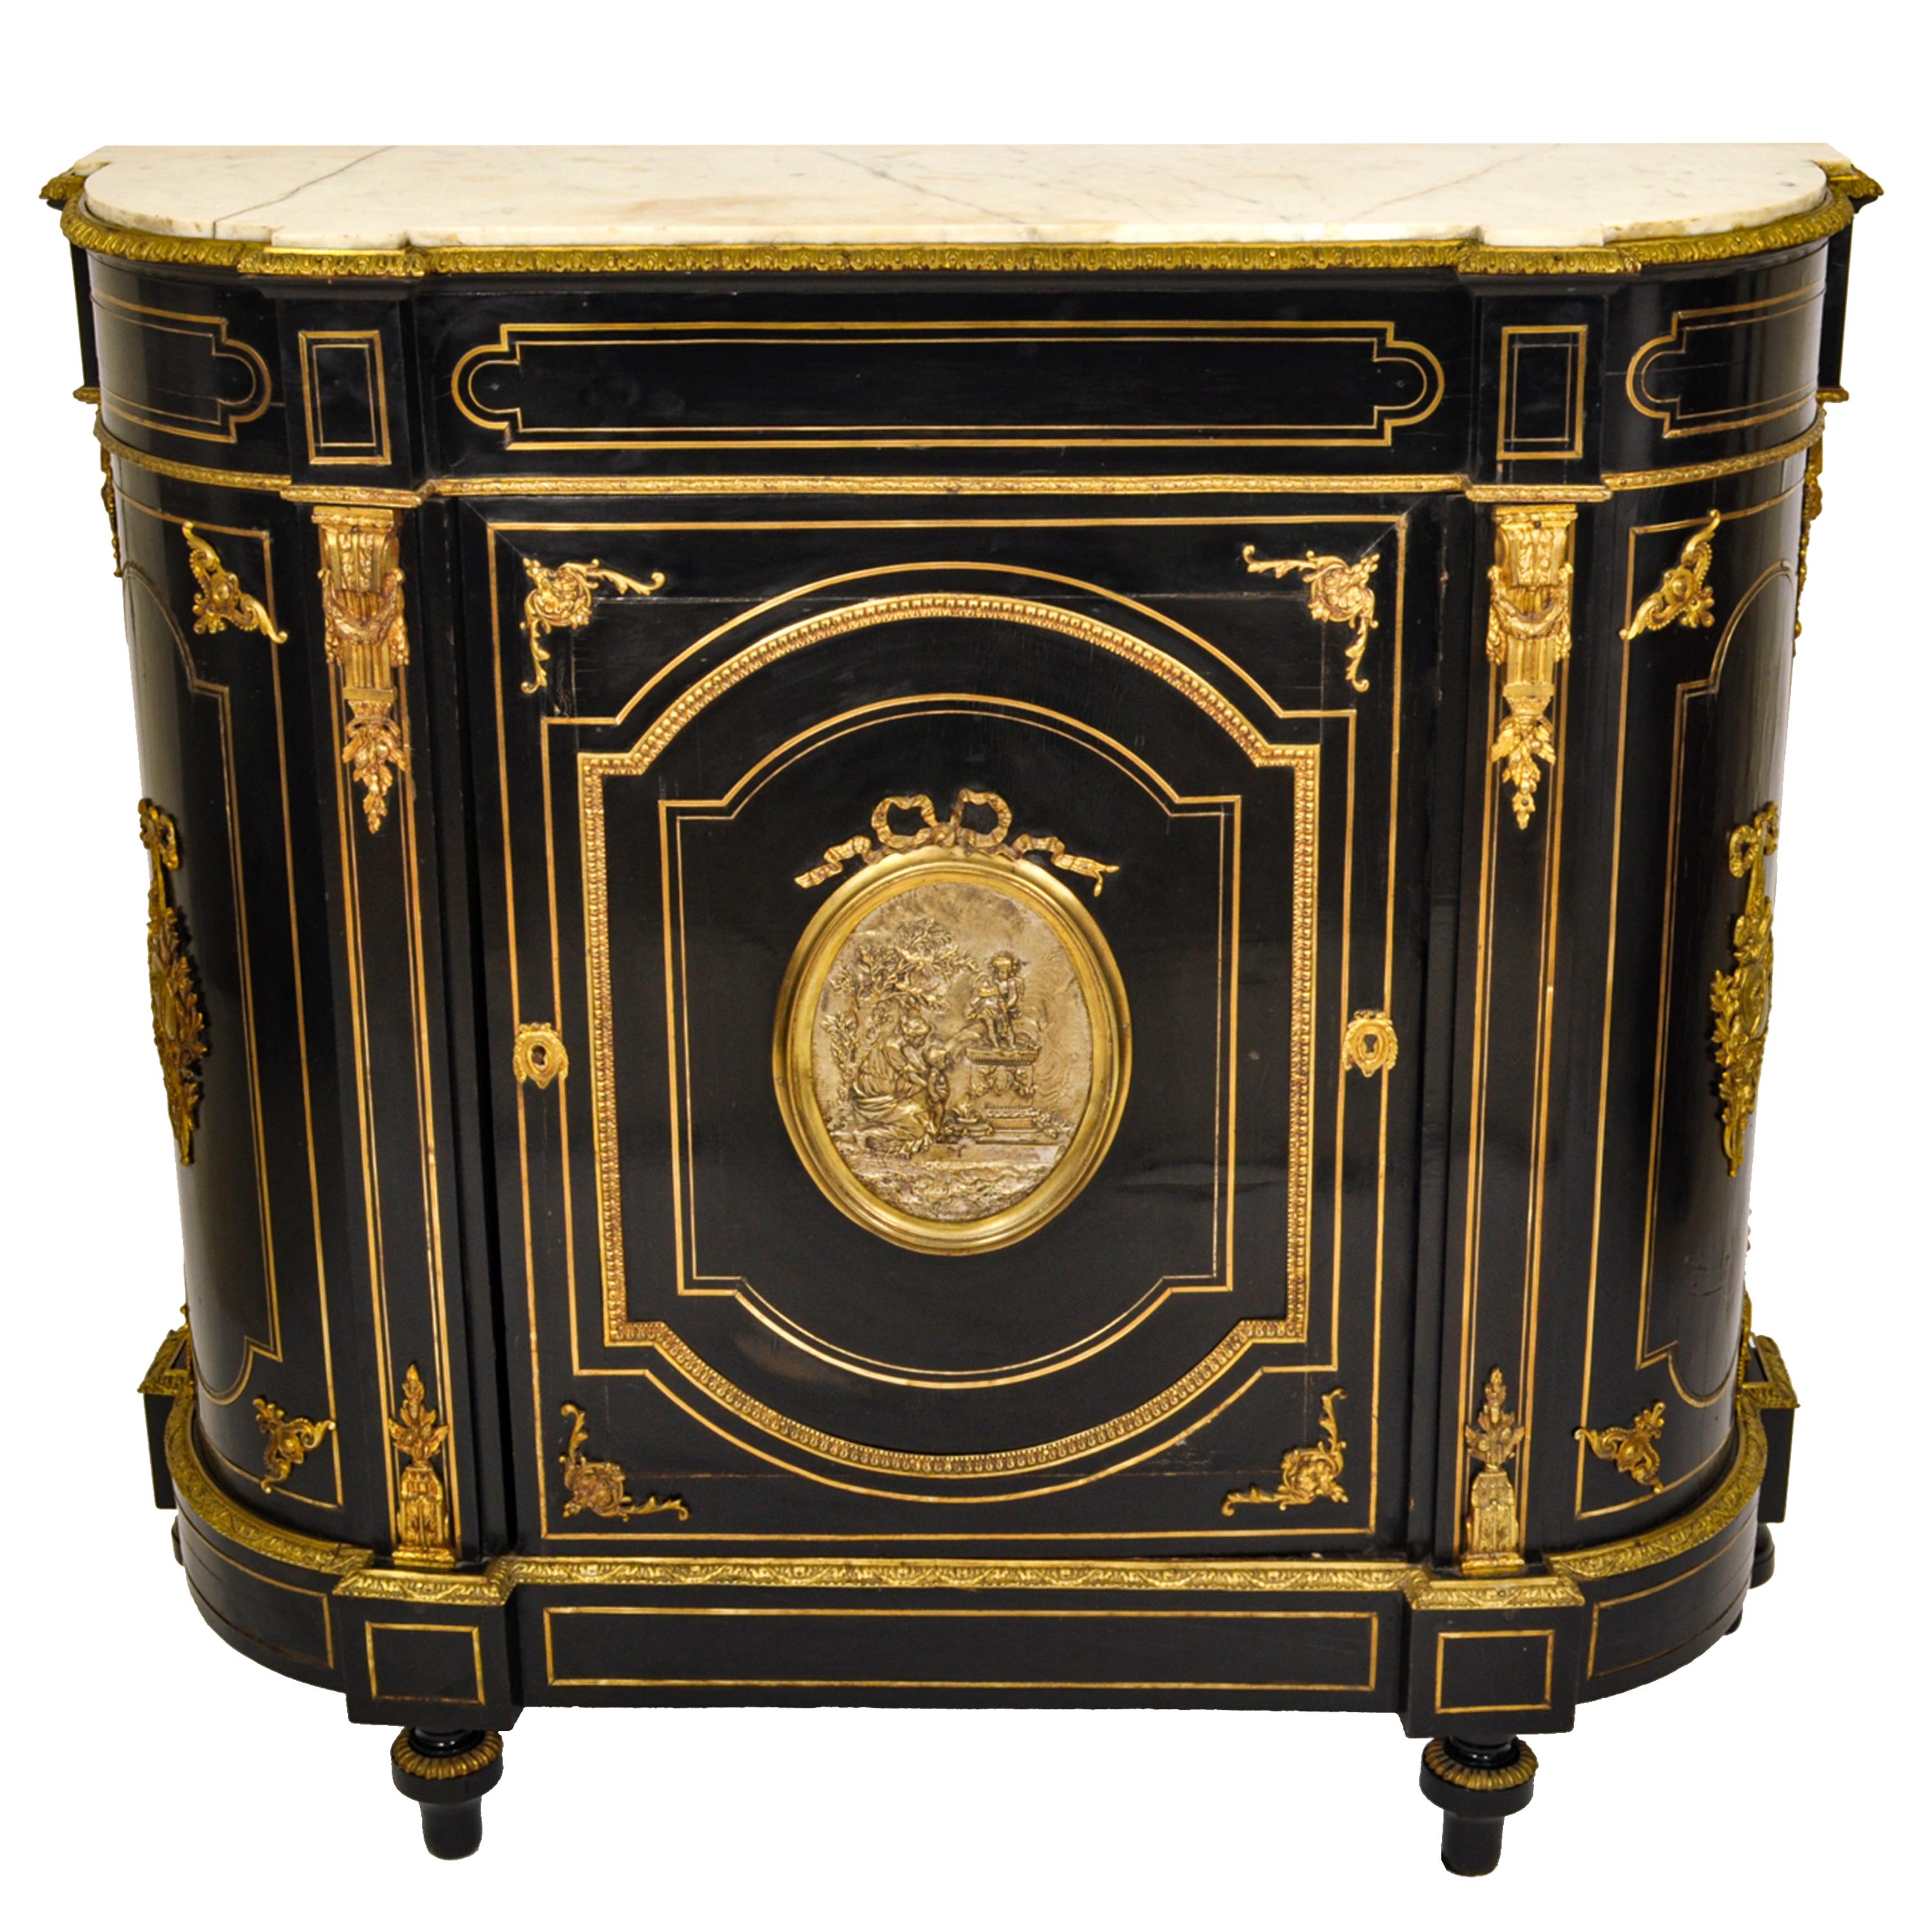 A fine & elegant antique French gilt bronze and ebonized Napoleon III cabinet, circa 1860.
The cabinet having a white Cararra marble top inset into an ebonized cabinet, the cabinet is sumptuously decorated with gilt bronze mounts, corbel brackets,